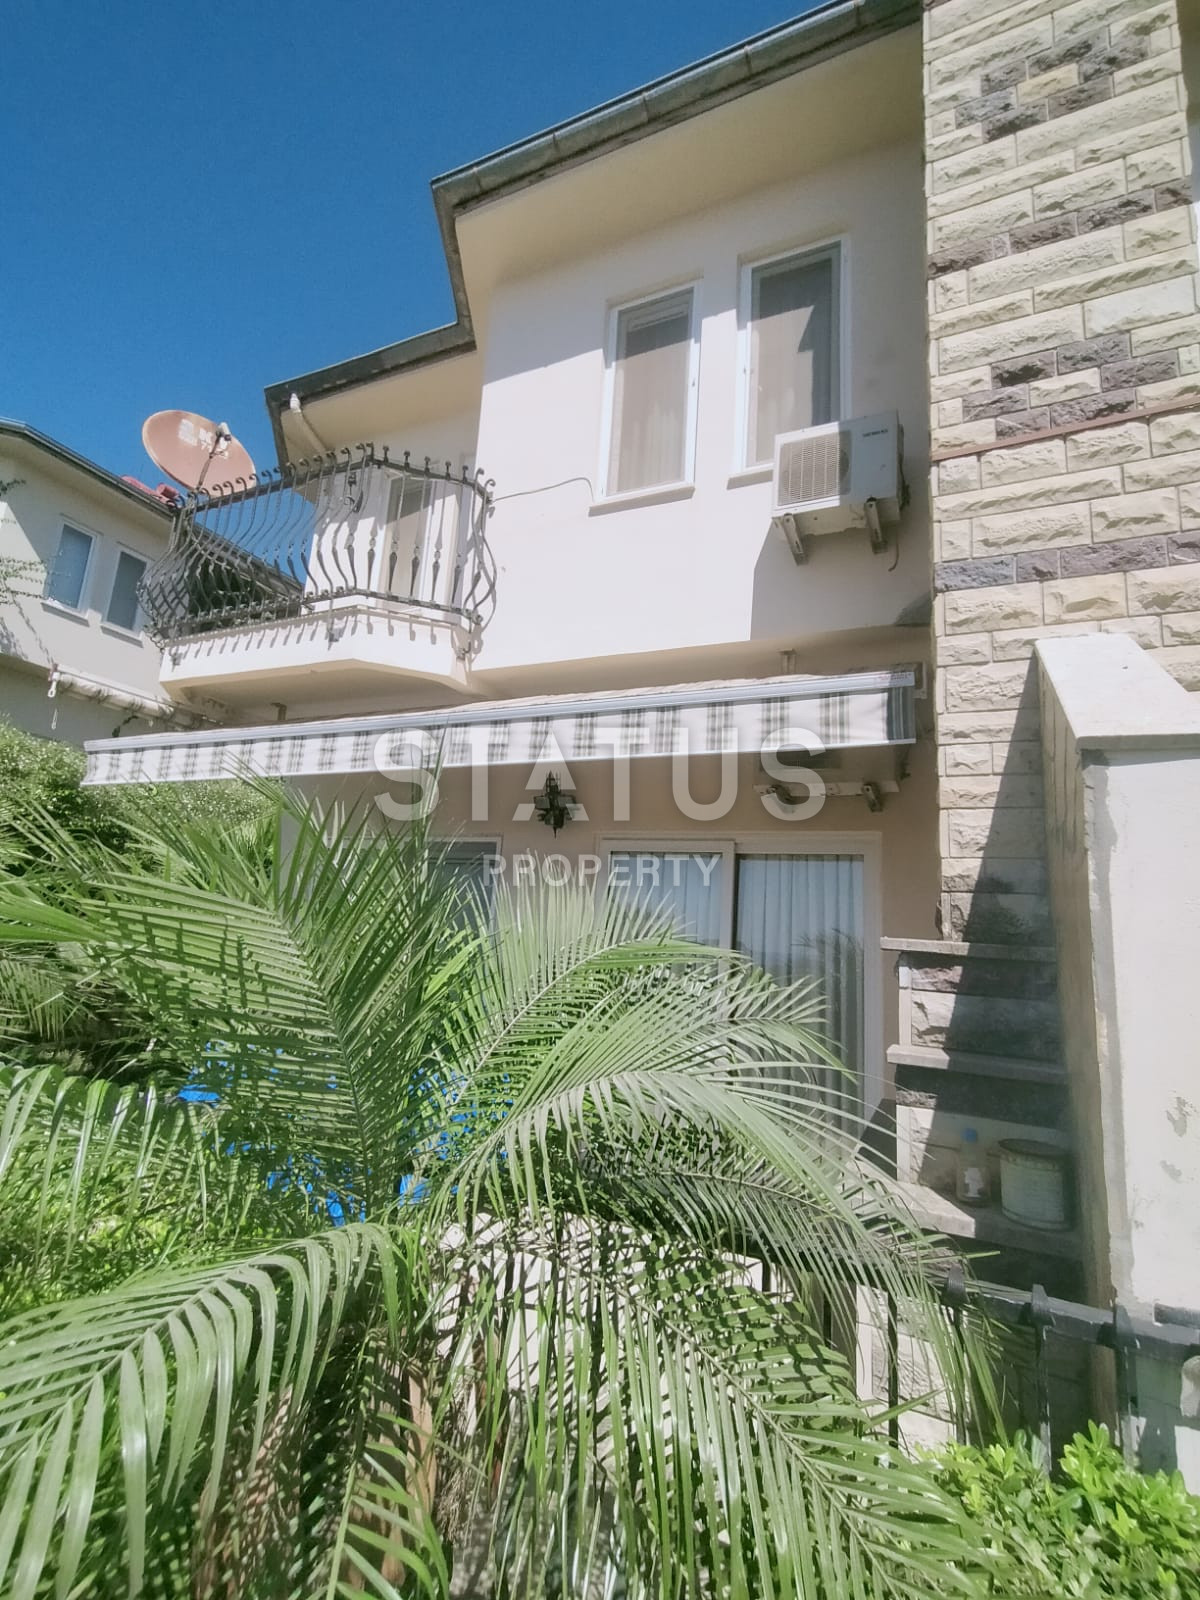 Two-storey villa 3+1 turnkey in the legendary residential complex in a quiet area of Kargicak. 190m2 фото 2